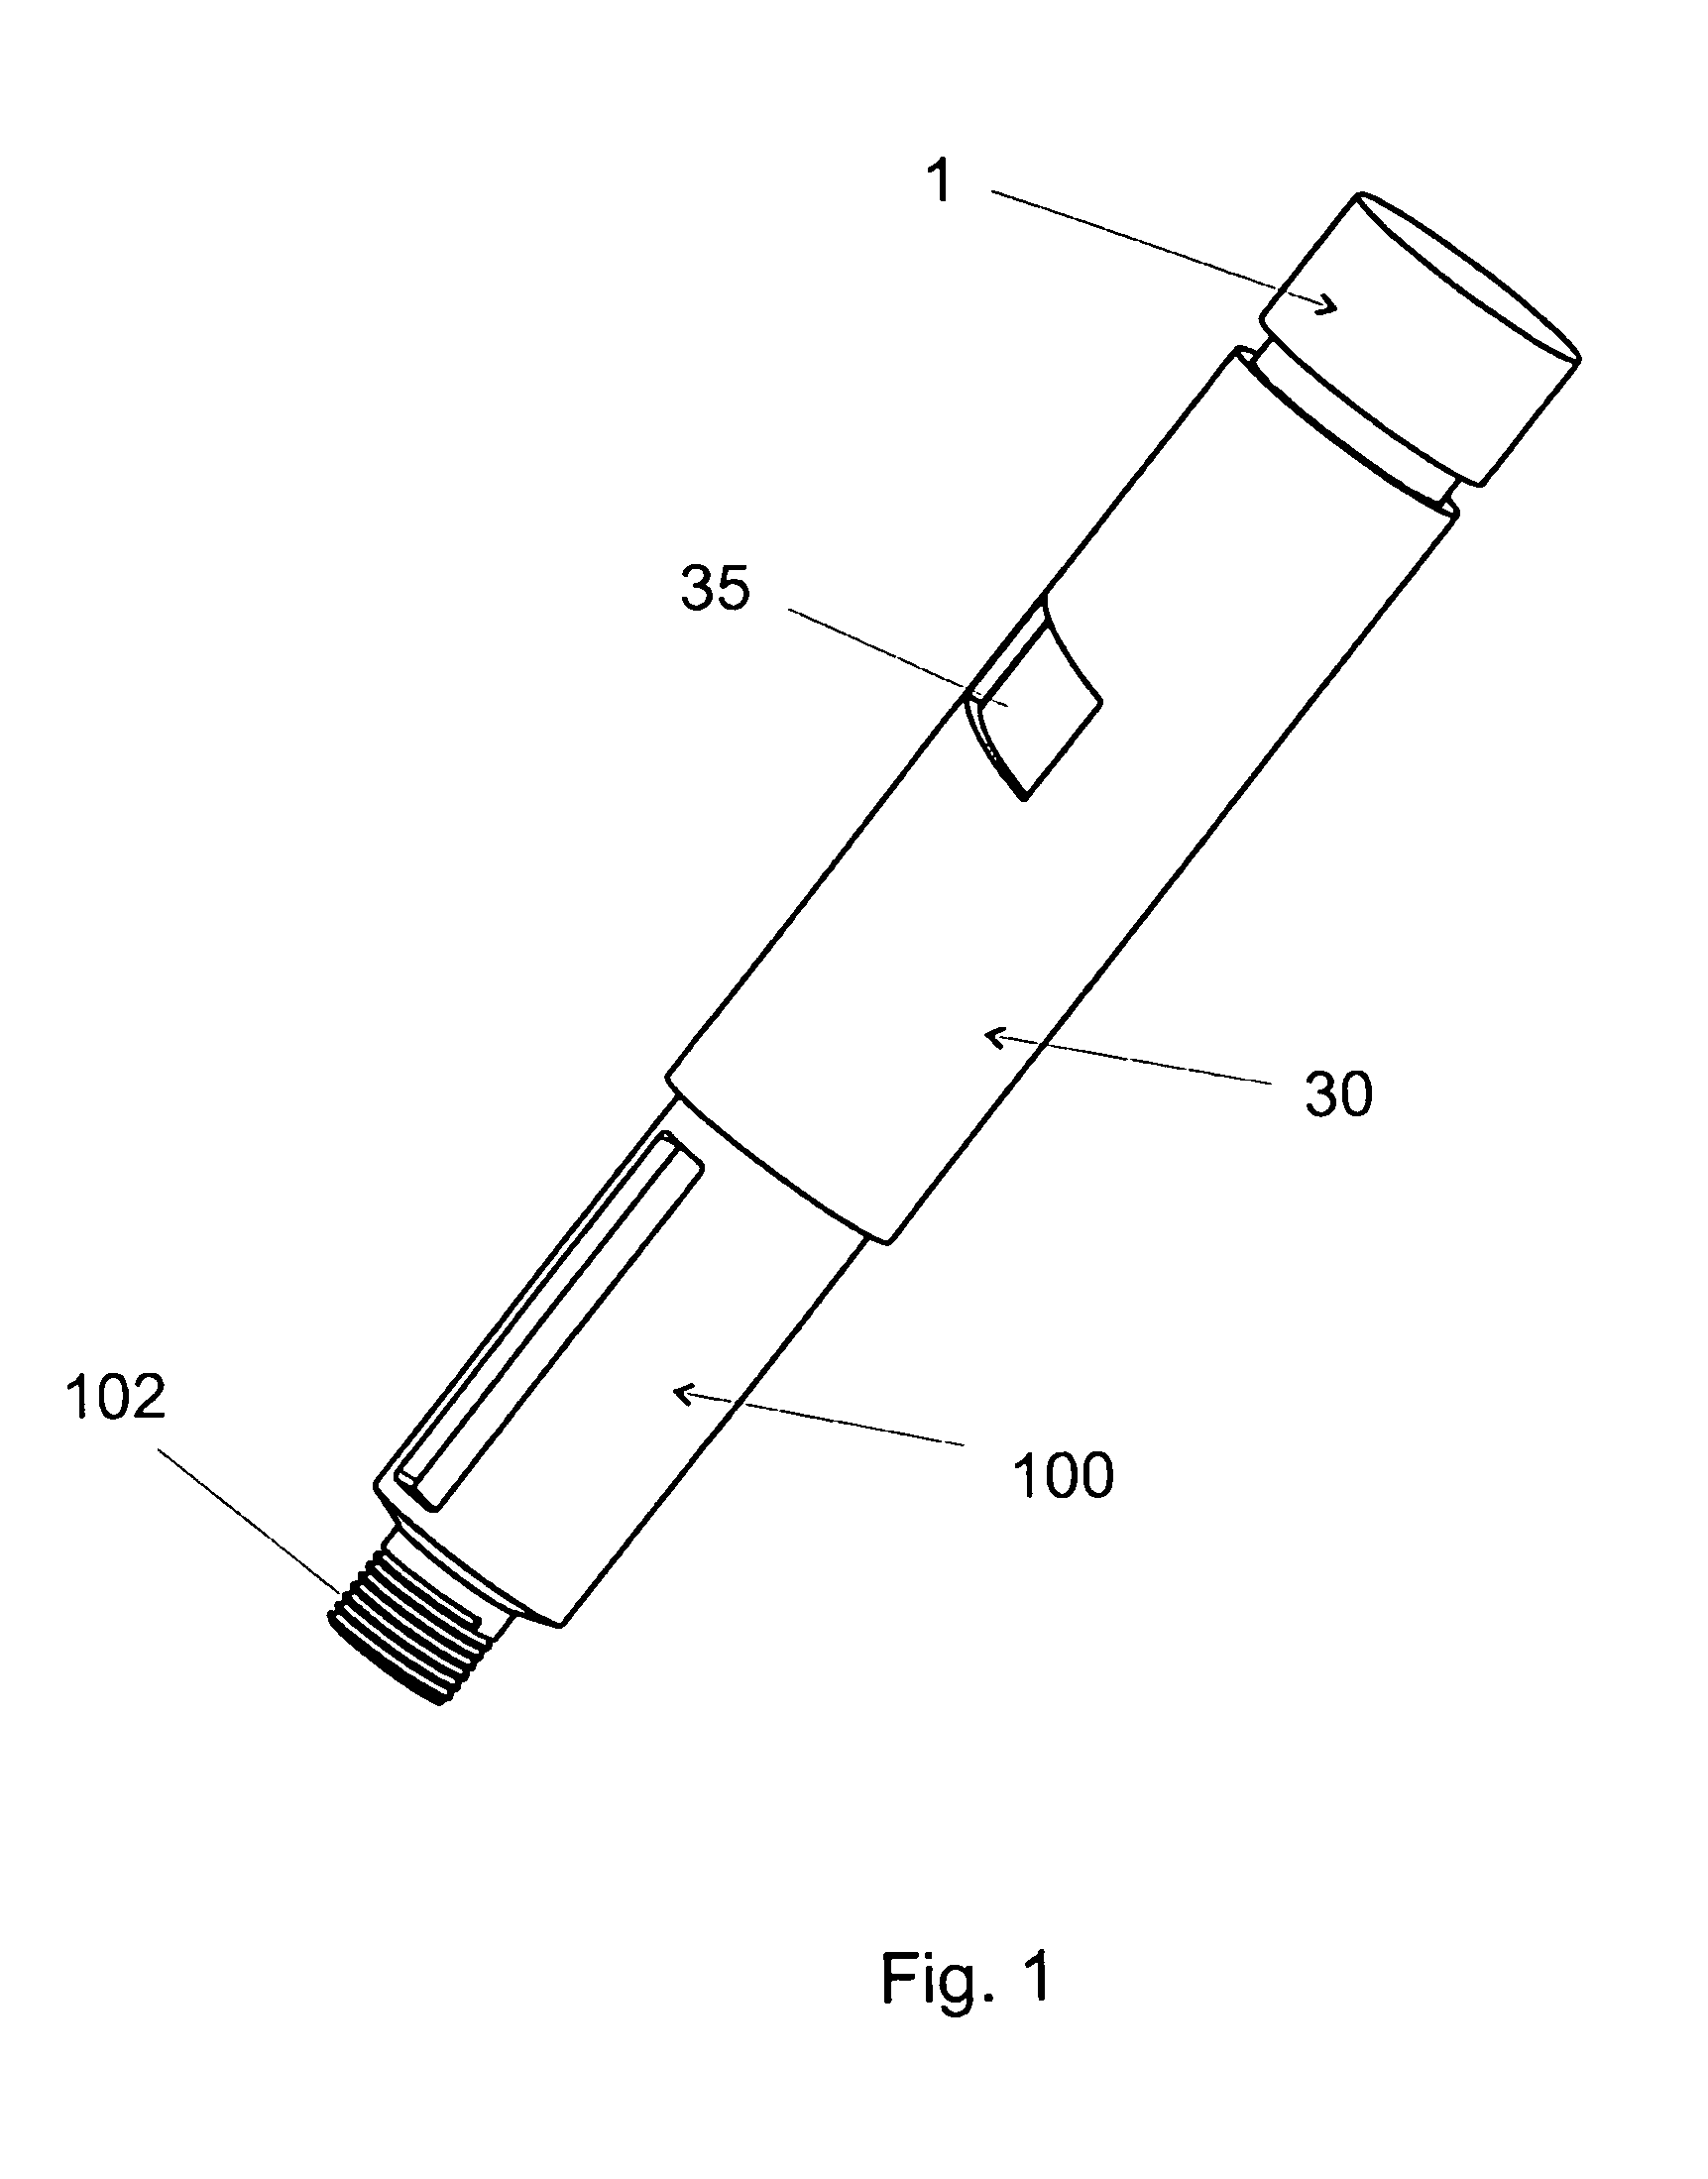 Injection device for apportioning set doses